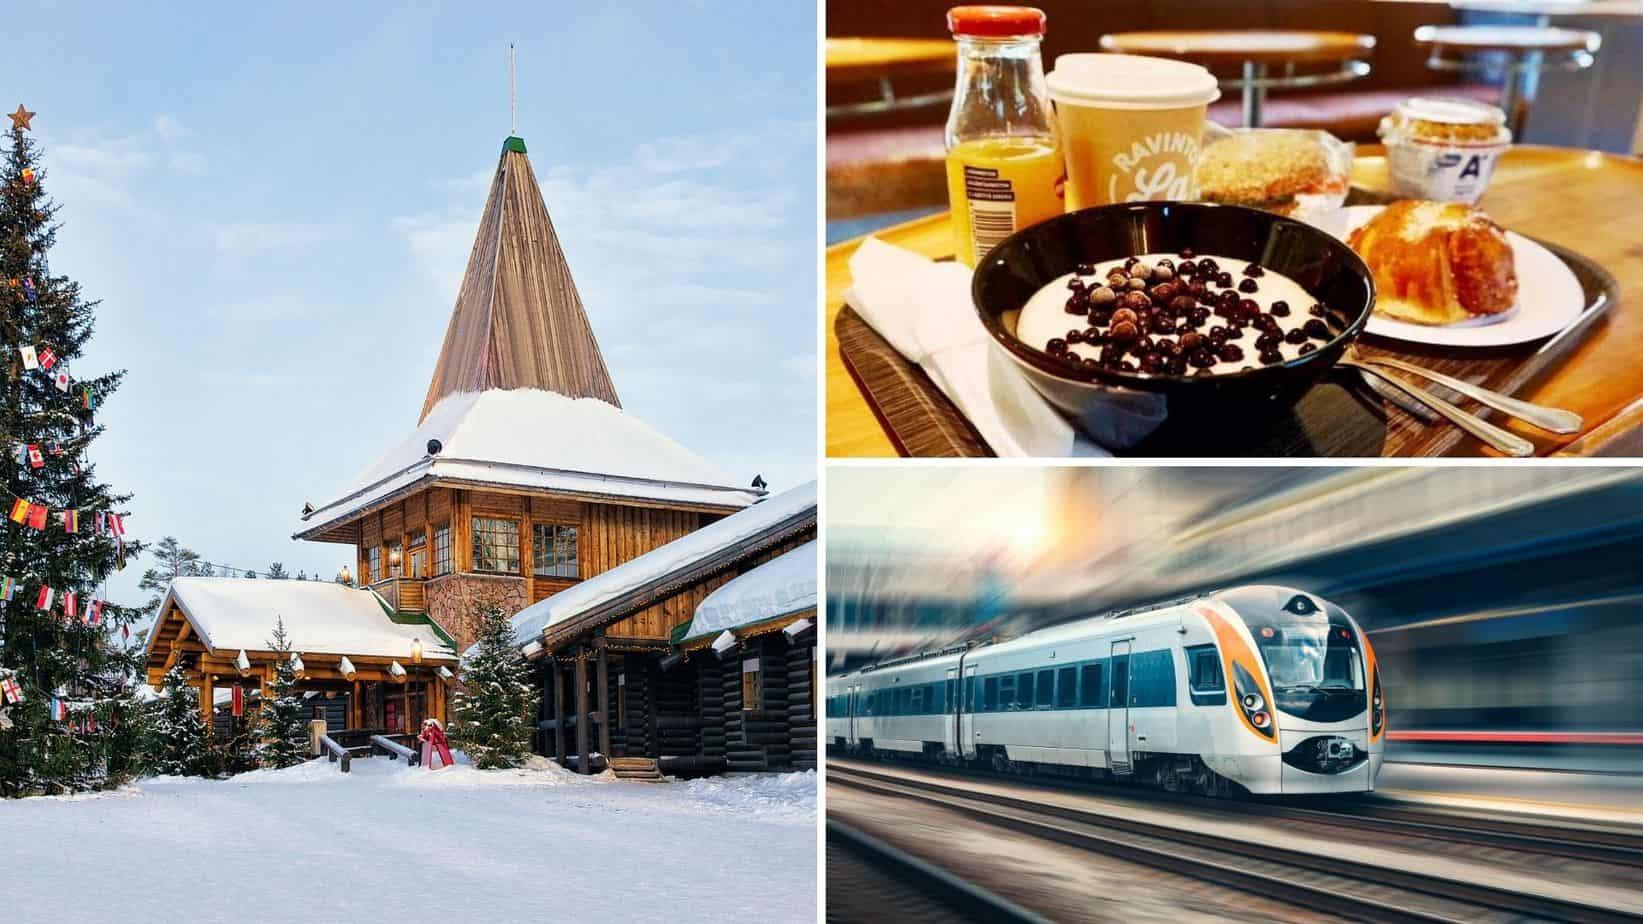 Helsinki to Lapland Train: 7 Important Tips to Booking and Traveling